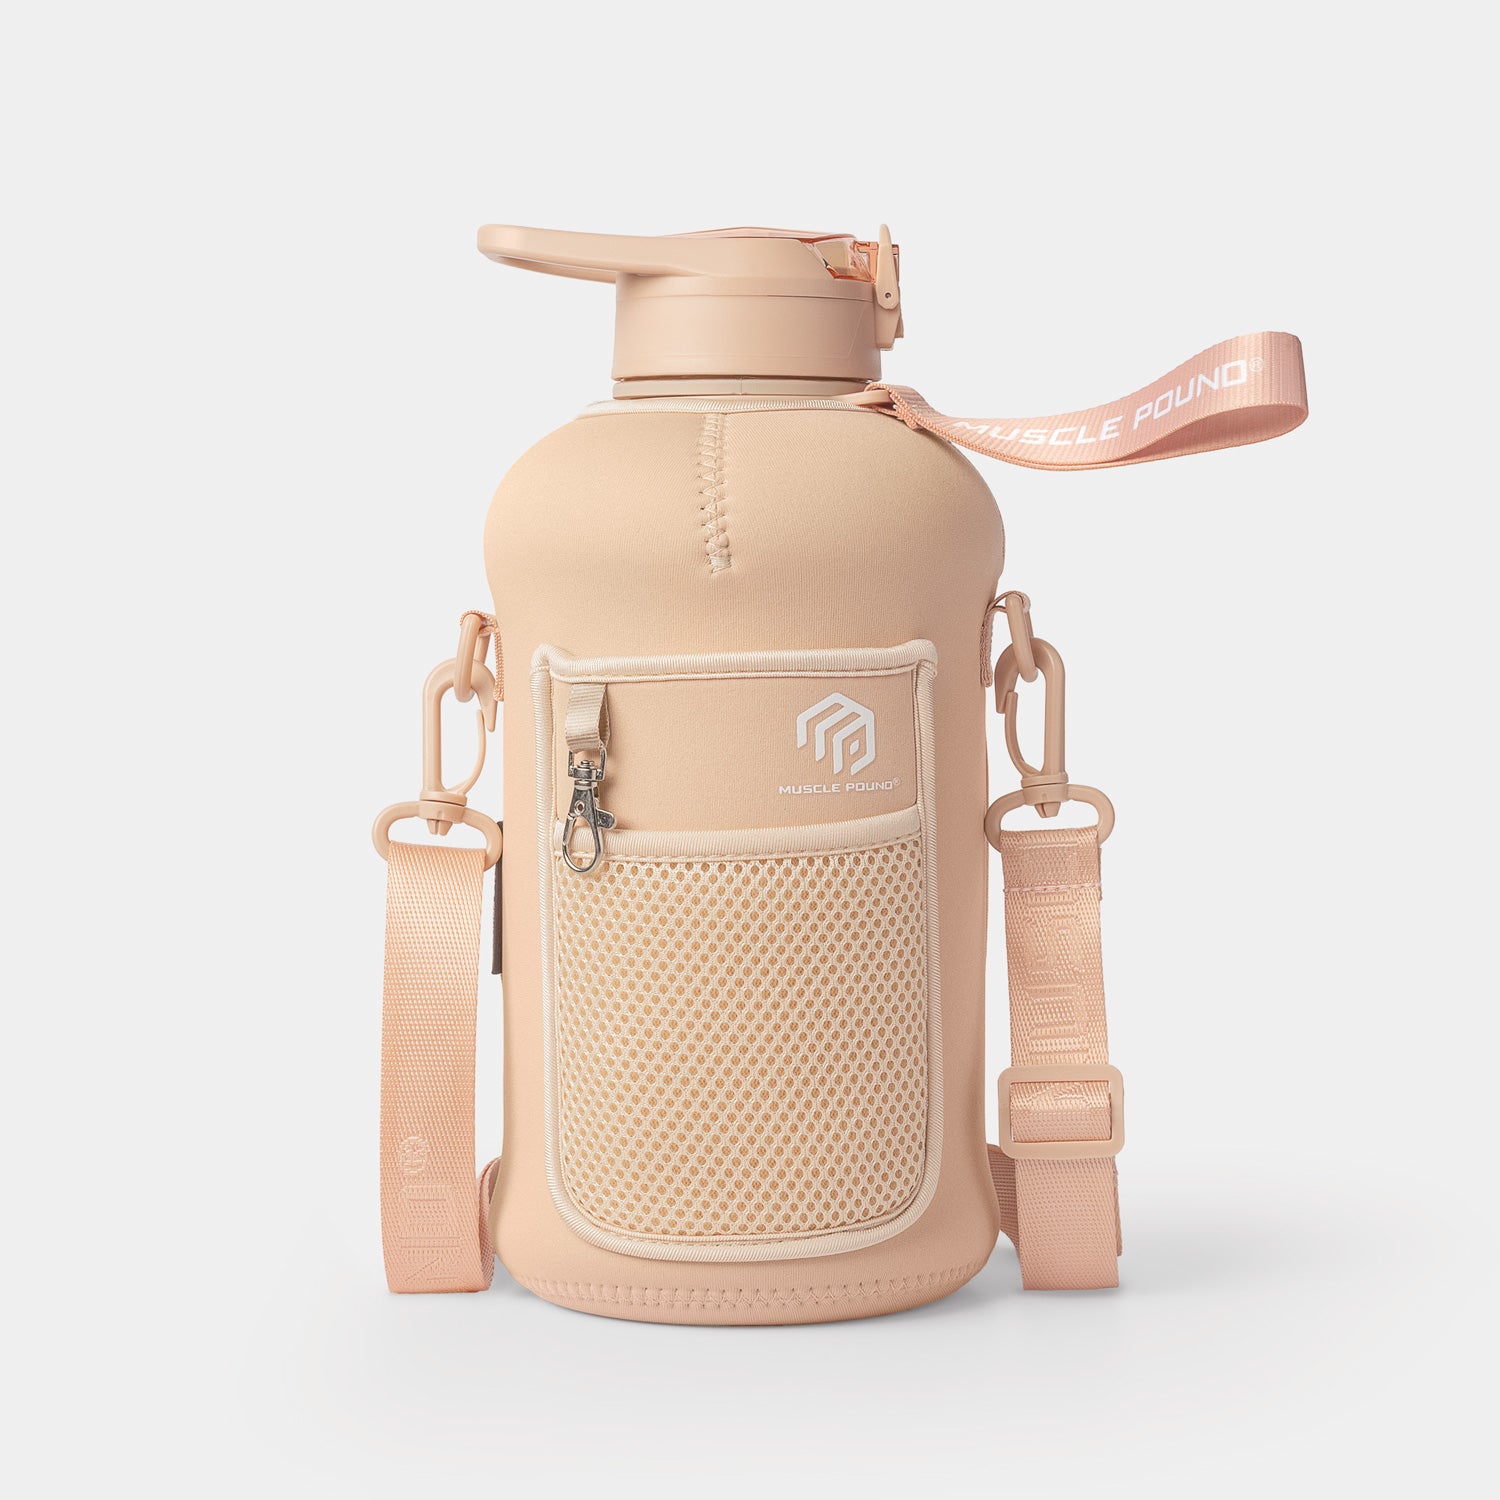 Front view of the Pro Jug in Coral color